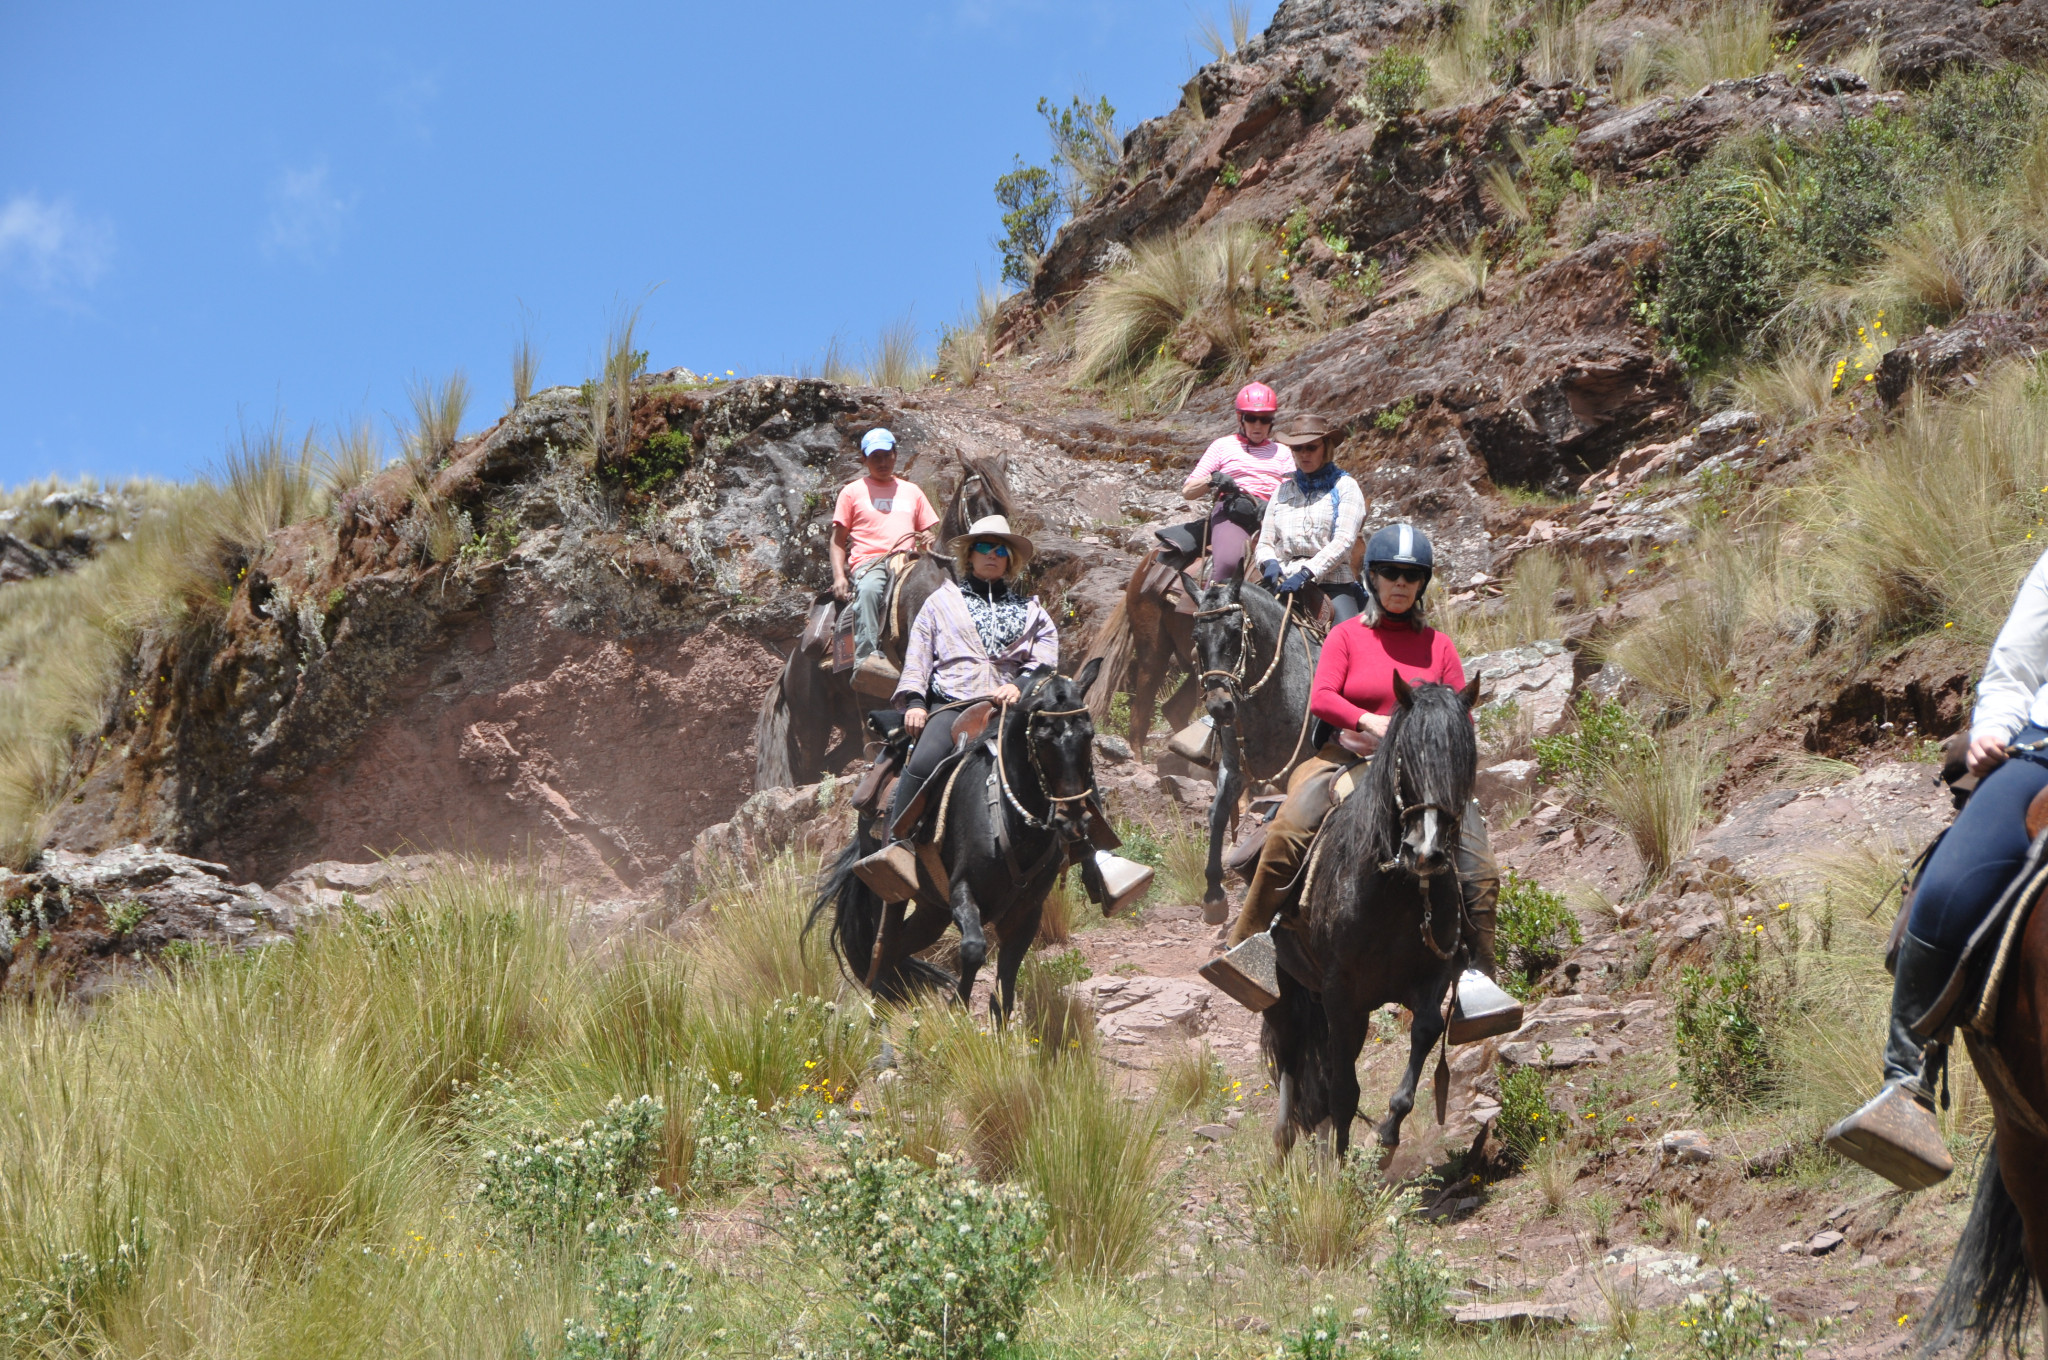 Photos of Sacred Valley horse ride in Peru